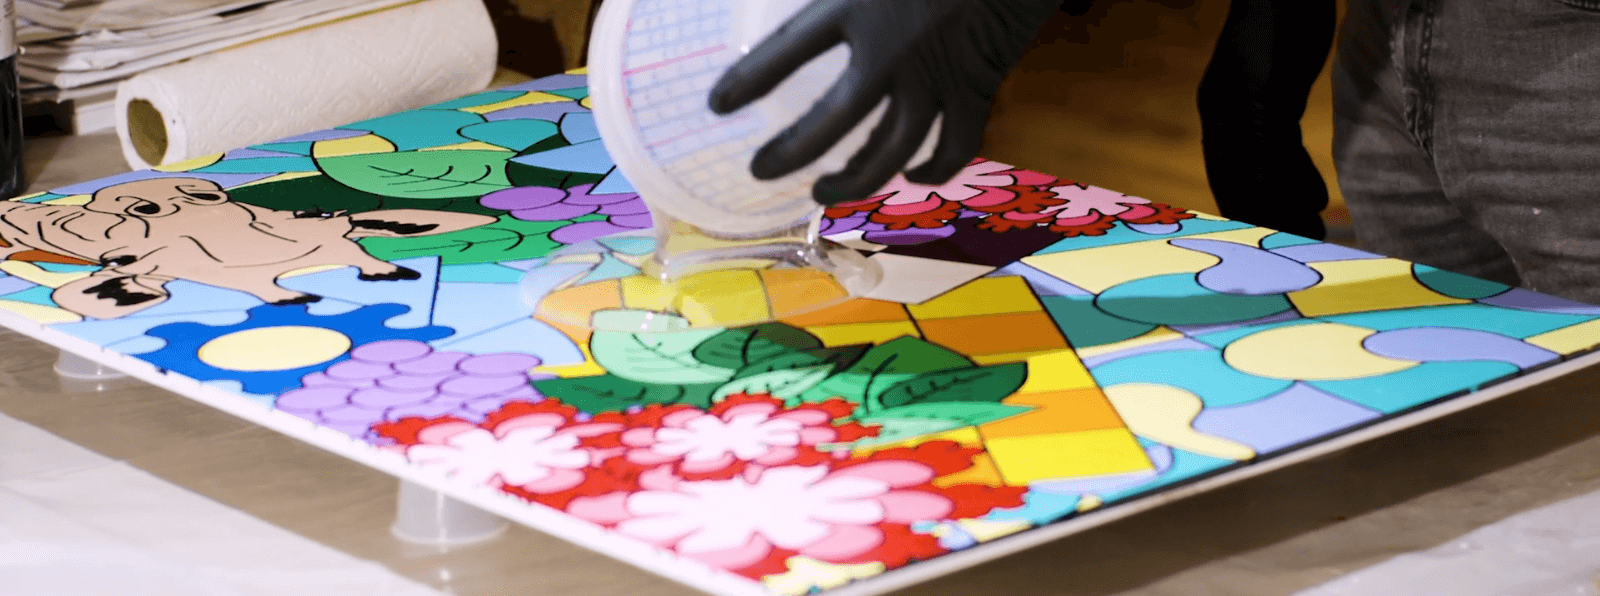 A person in gloves pouring clear liquid onto a red, green, yellow, orange, blue, and purple painting